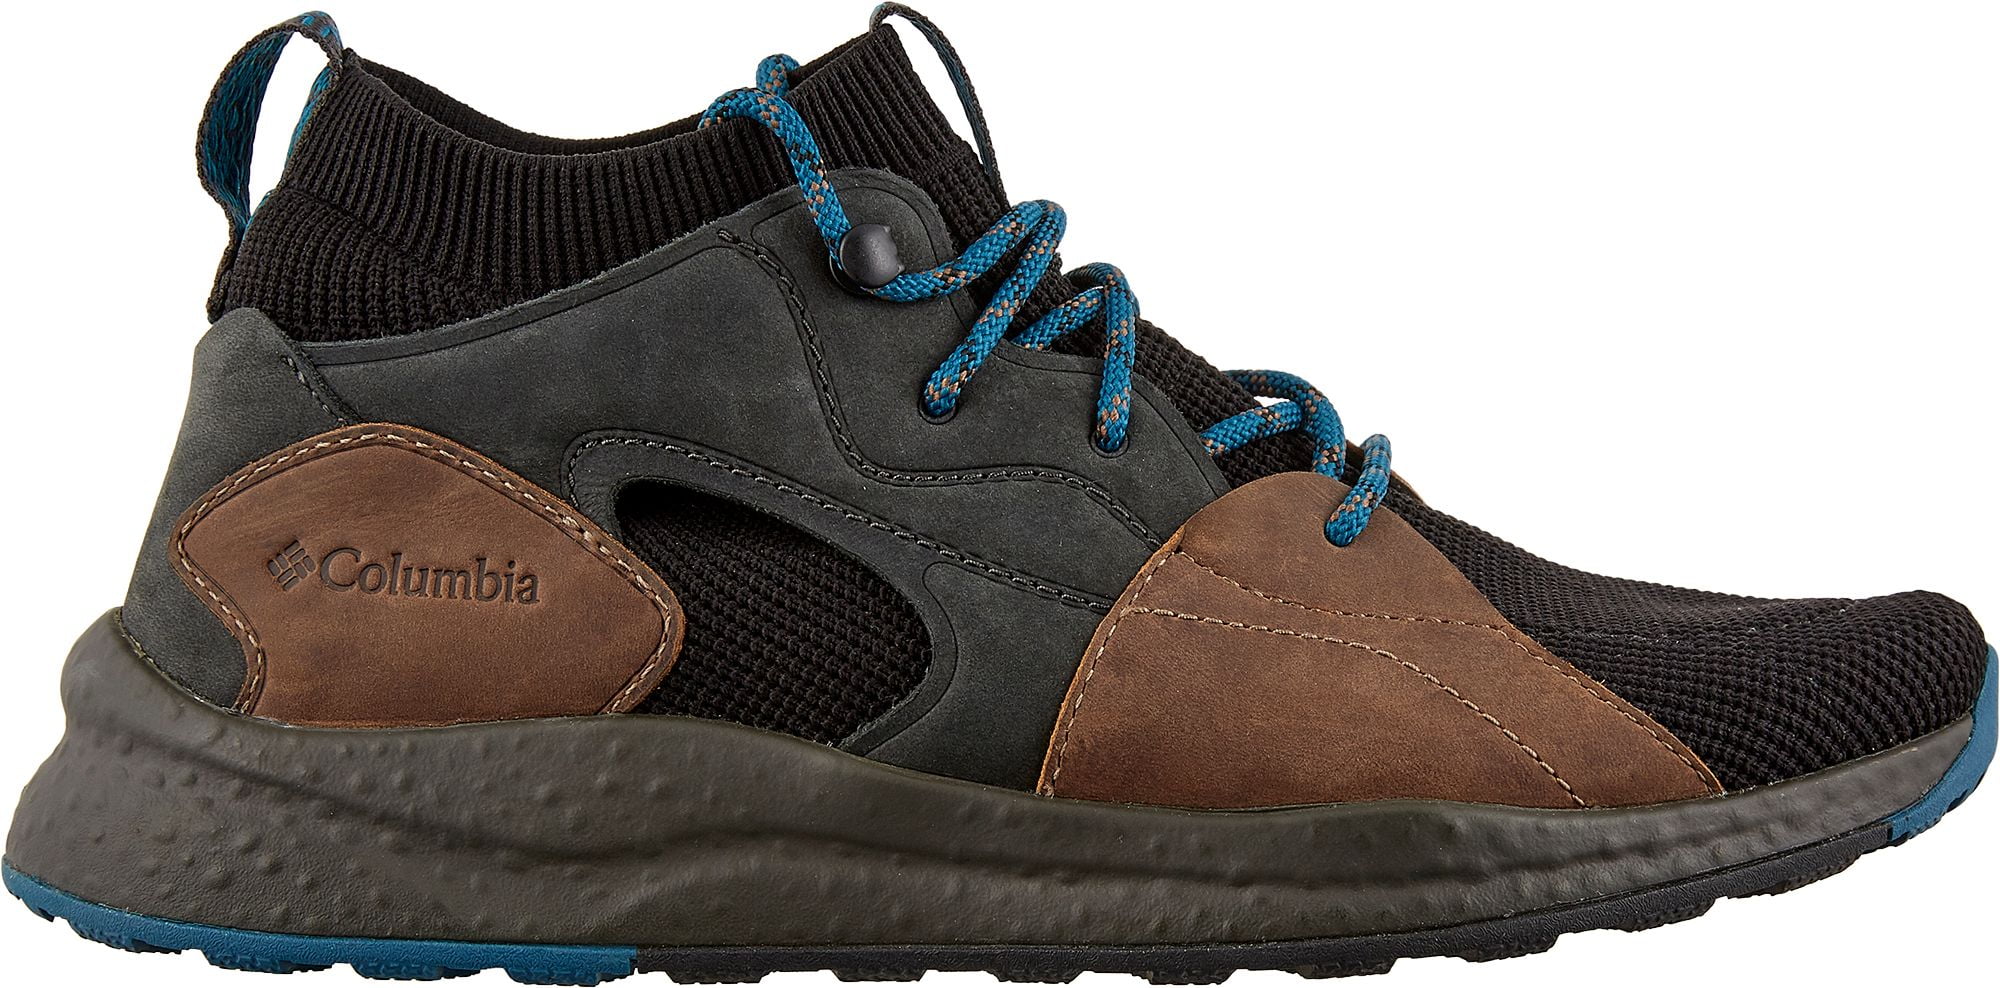 columbia outdry mid